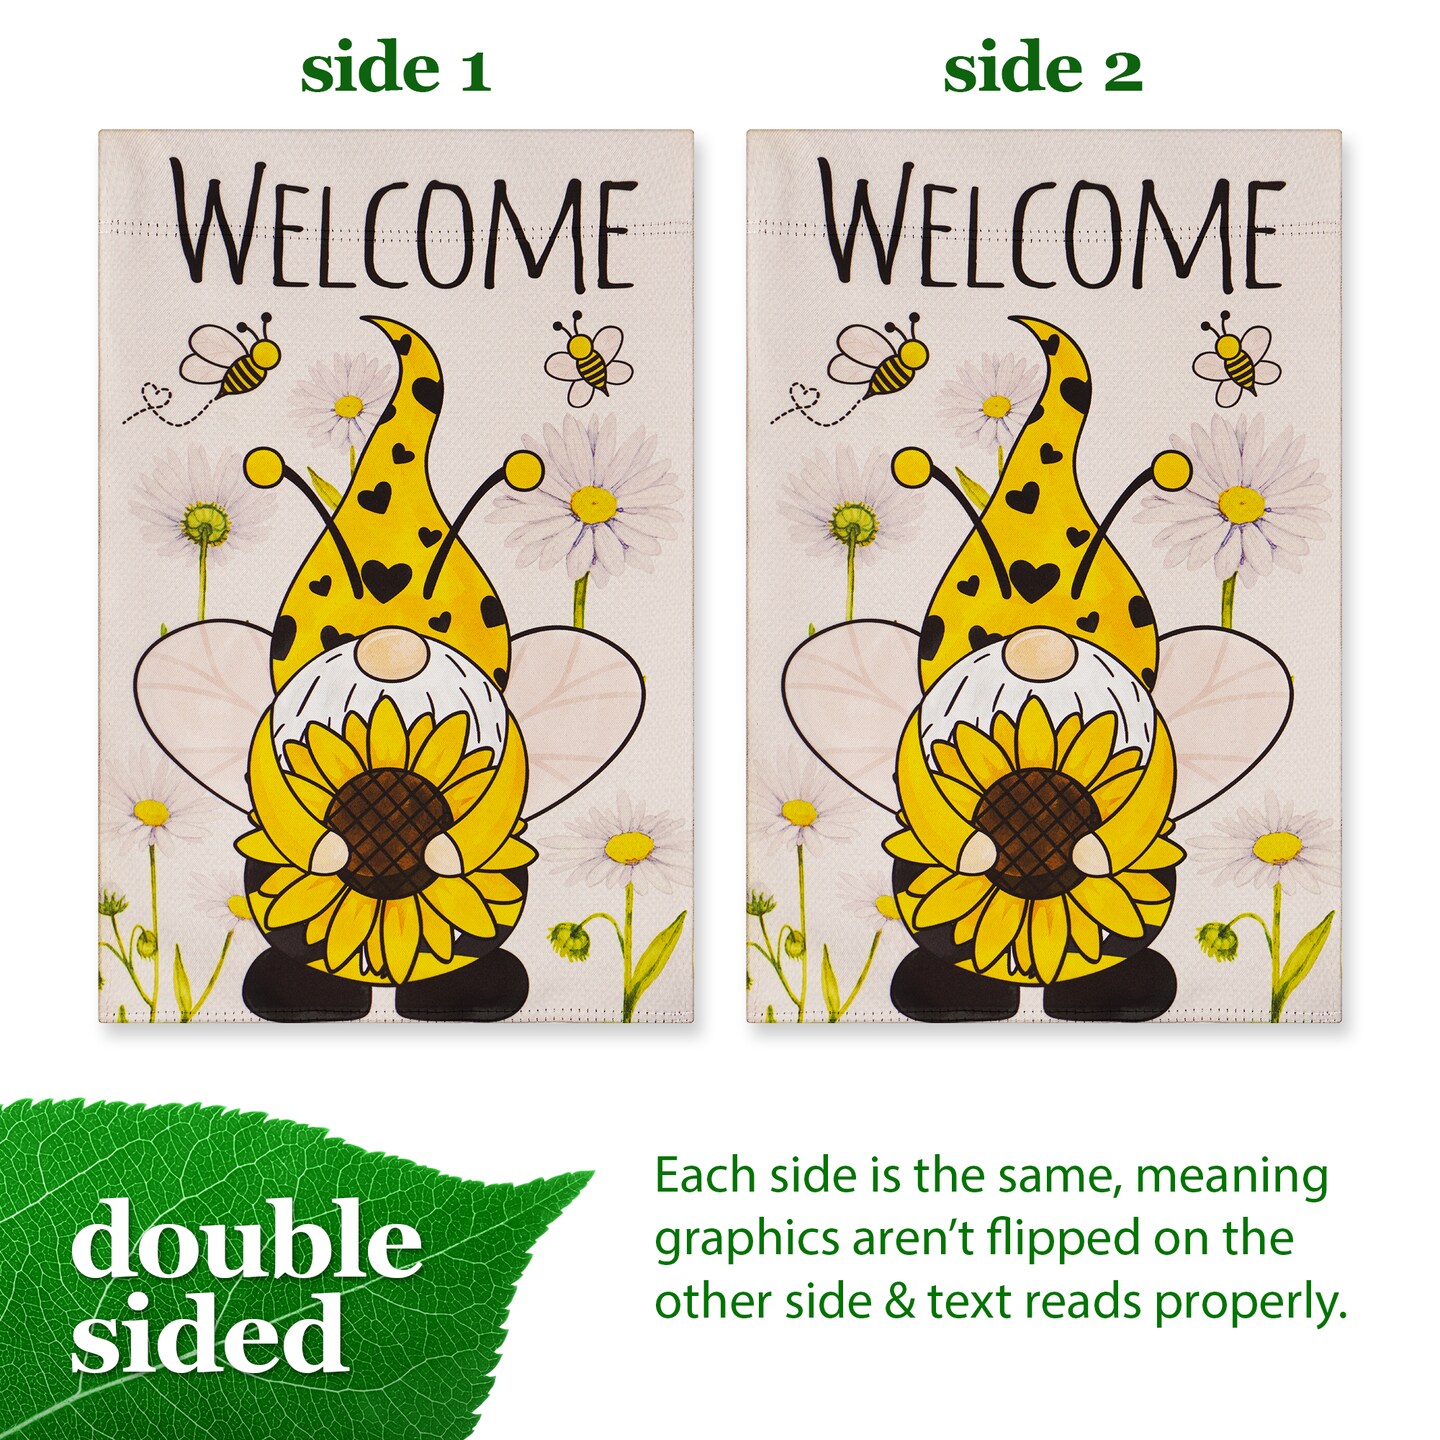 G128 Garden Flag Welcome Bee Gnome with Sunflower 12&#x22;x18&#x22; Blockout Fabric